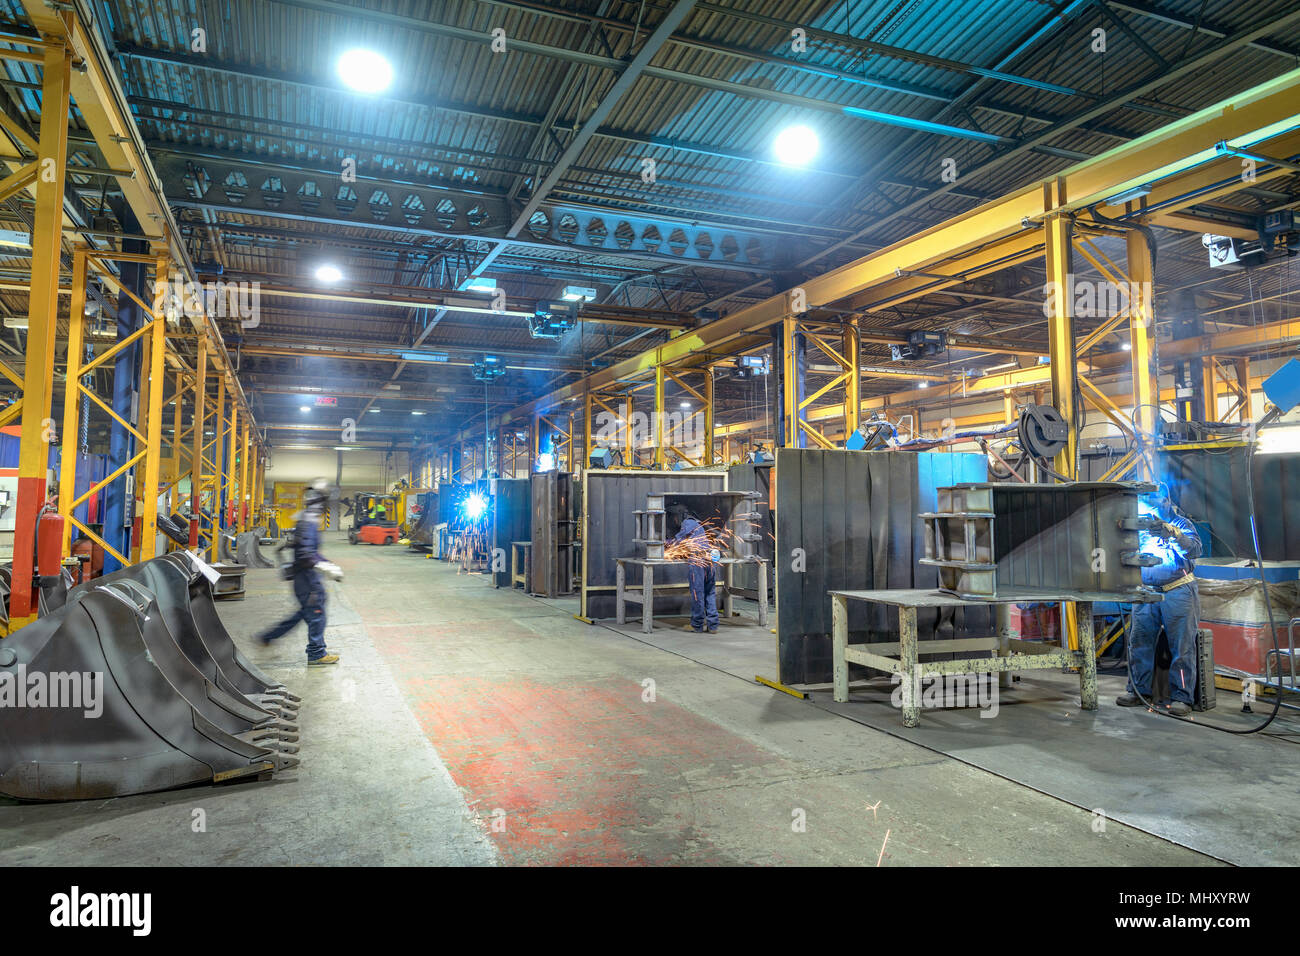 Wide angle view of welding bays in engineering factory Stock Photo